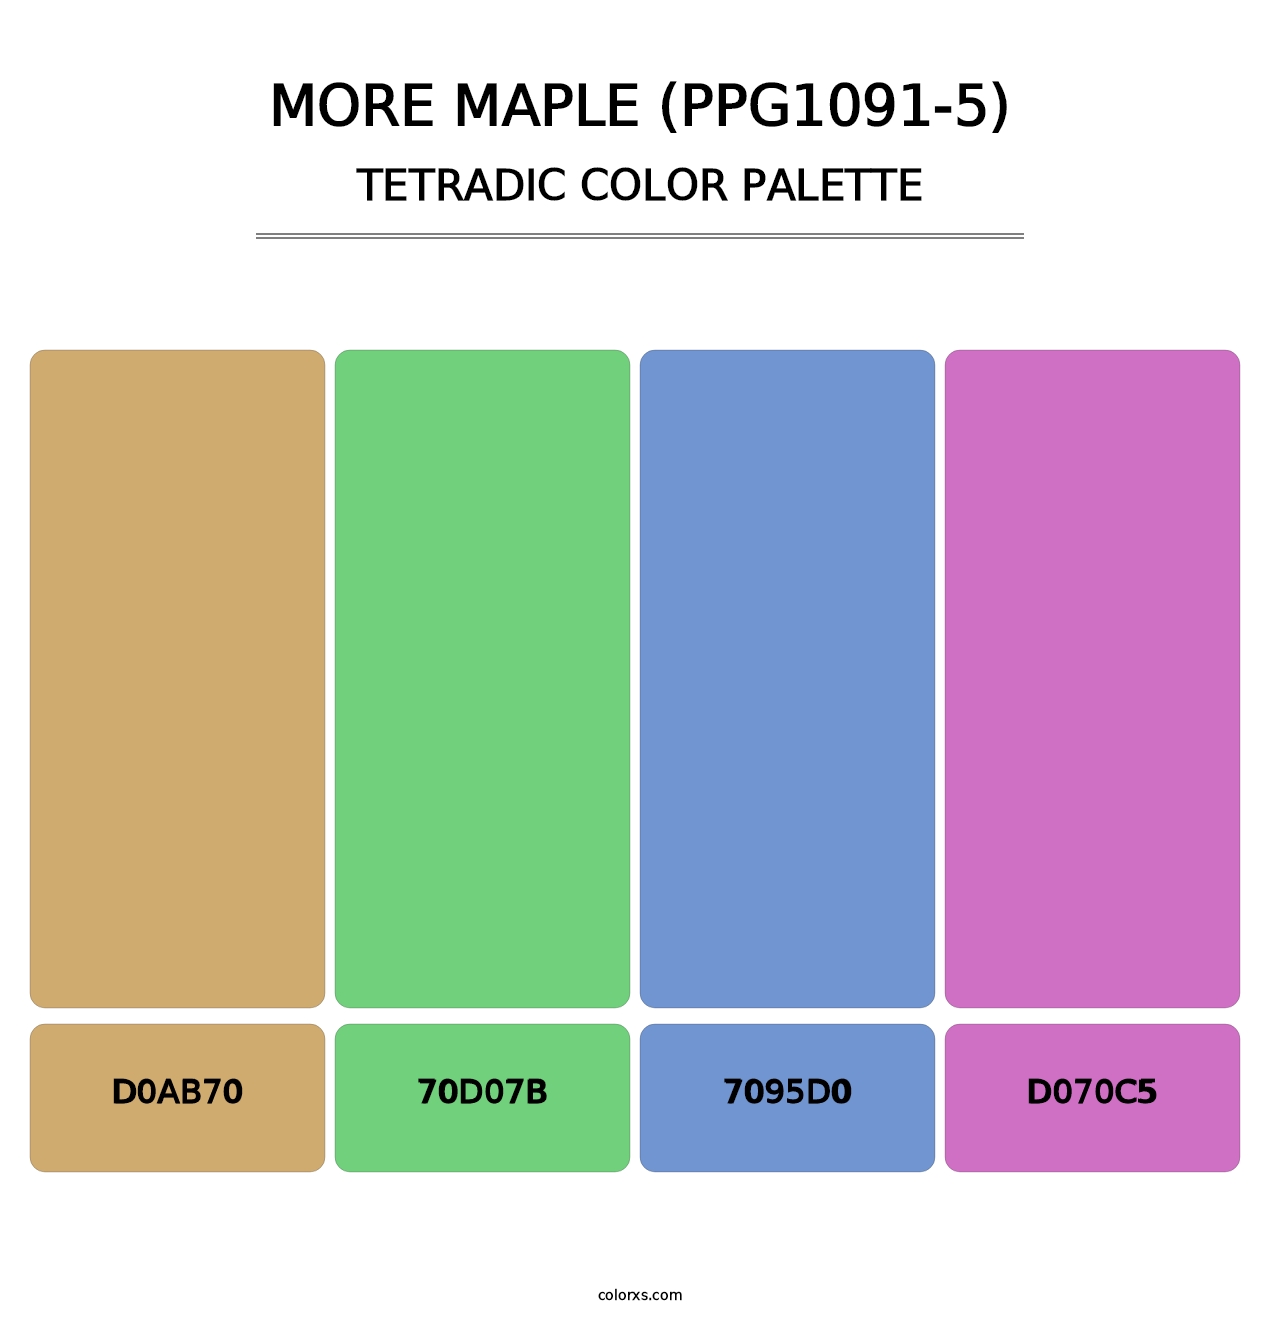 More Maple (PPG1091-5) - Tetradic Color Palette